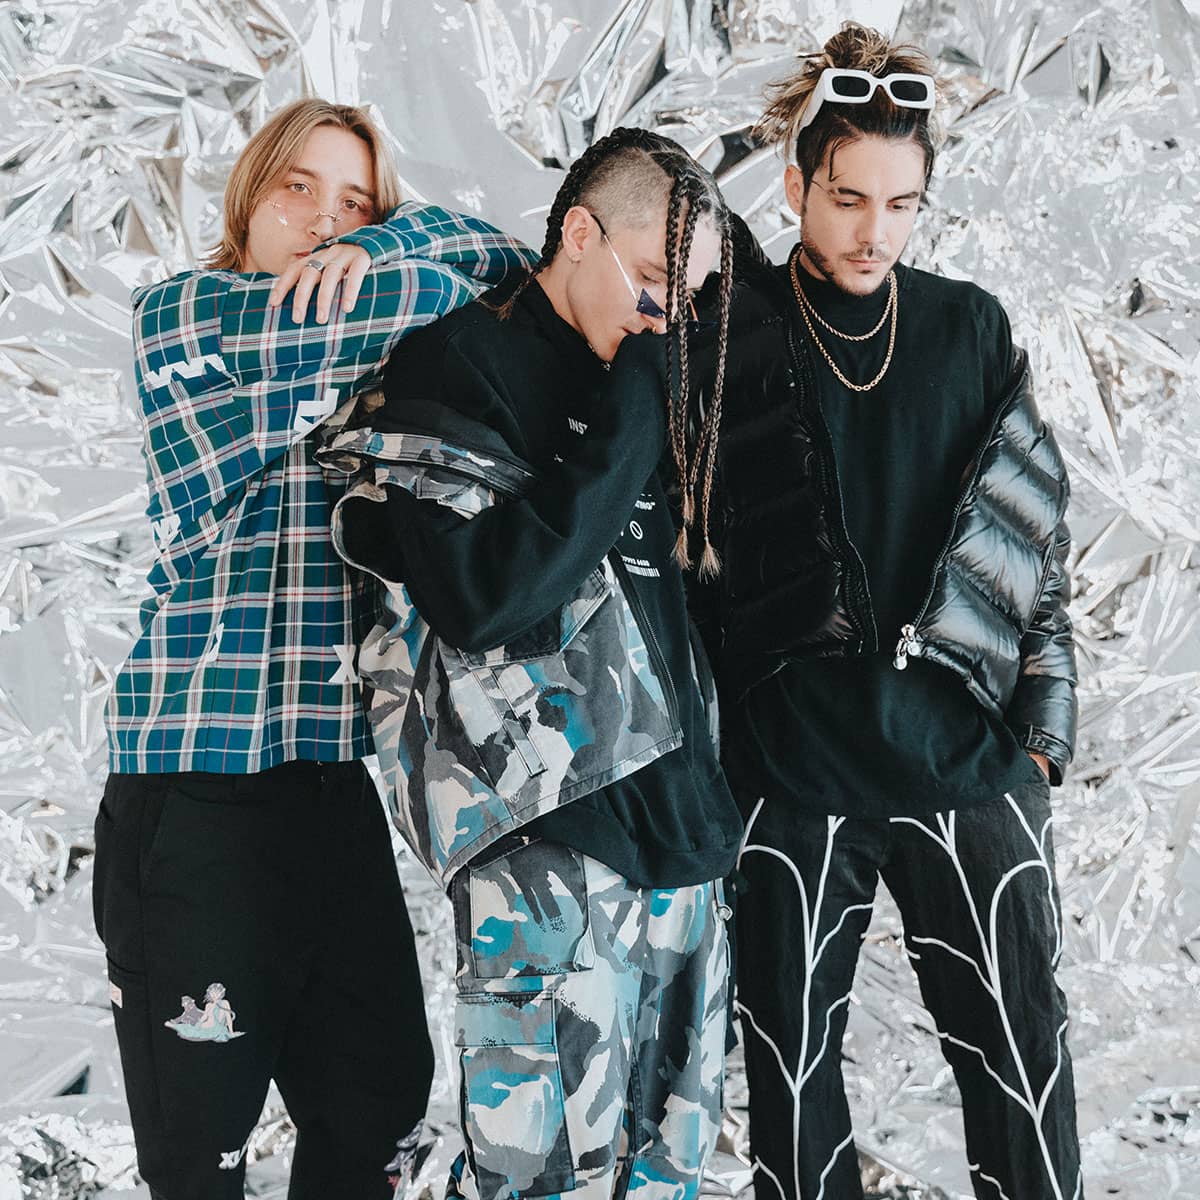 Chase Atlantic merchandise, posters and special issues from Rock Sound magazine.